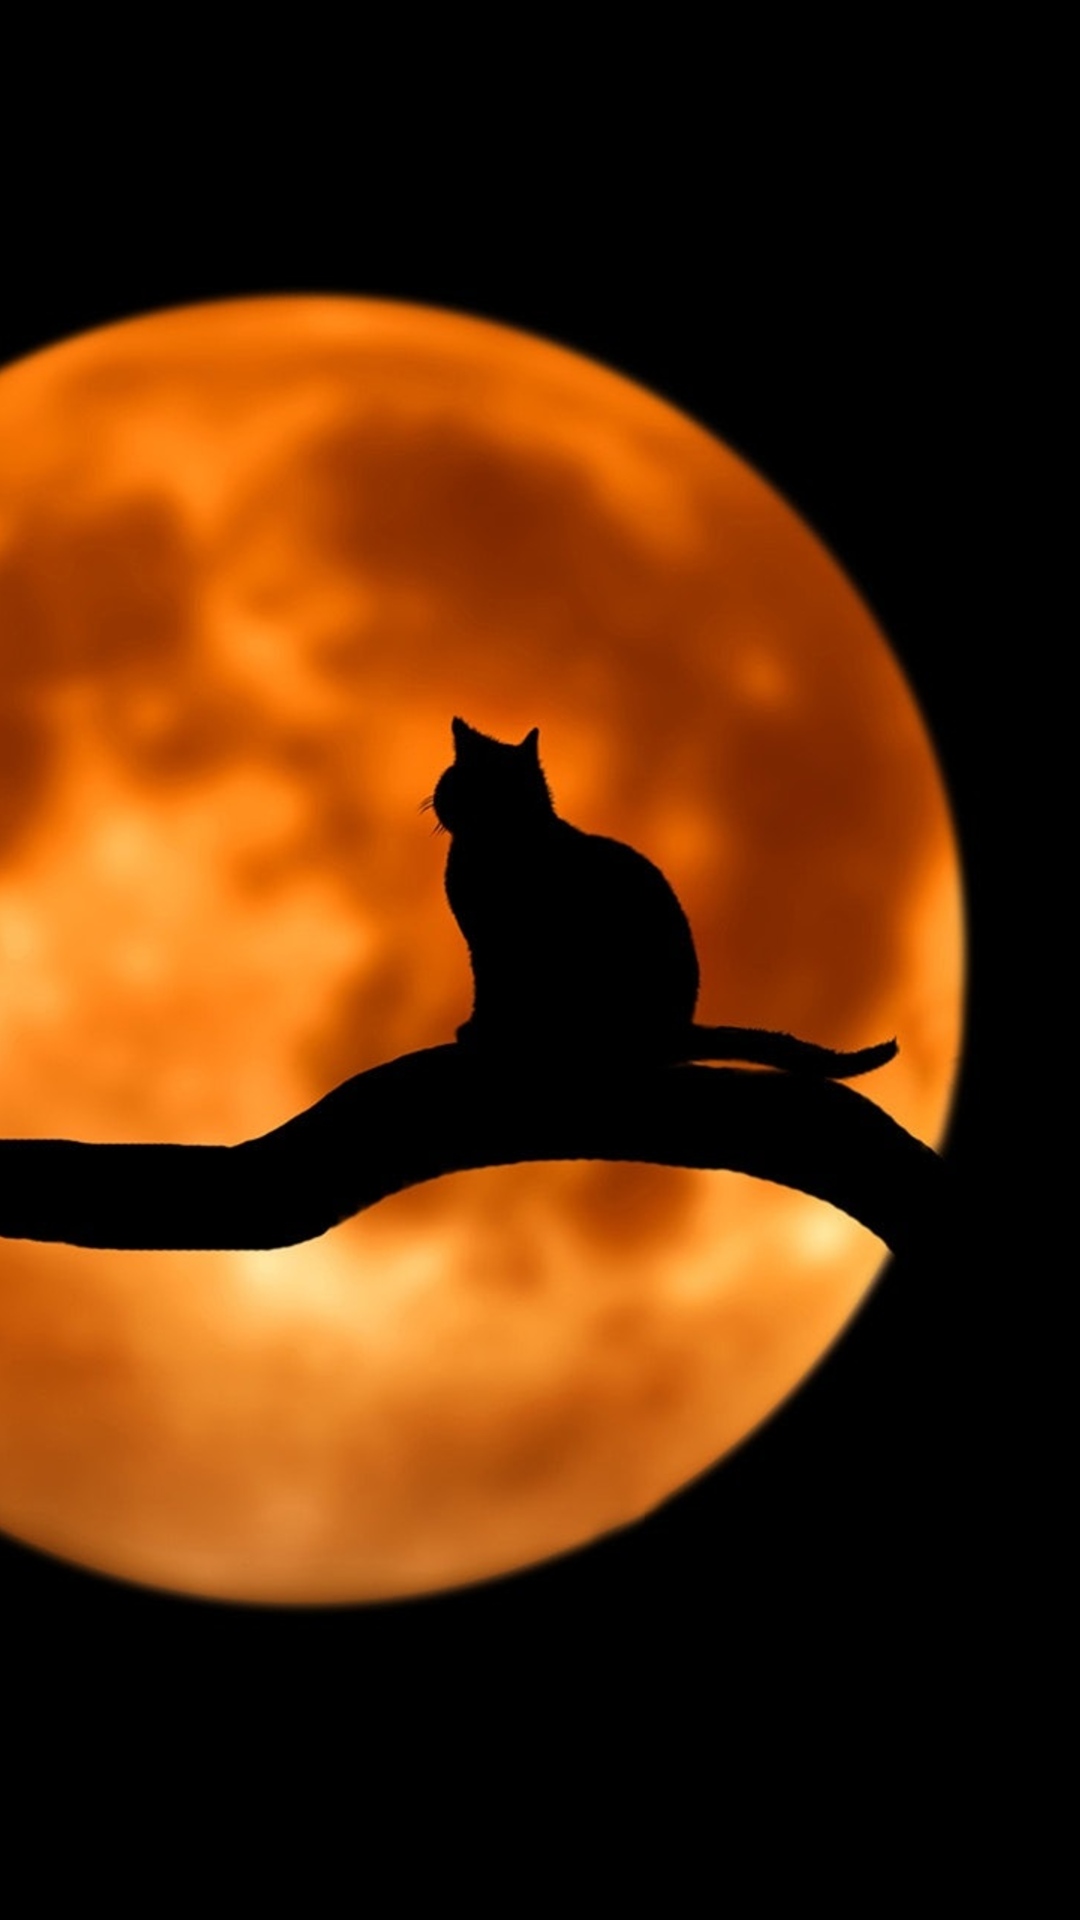 Black Cat and Moon Dark Amoled Huawei P40 Wallpapers Download 1080x1920